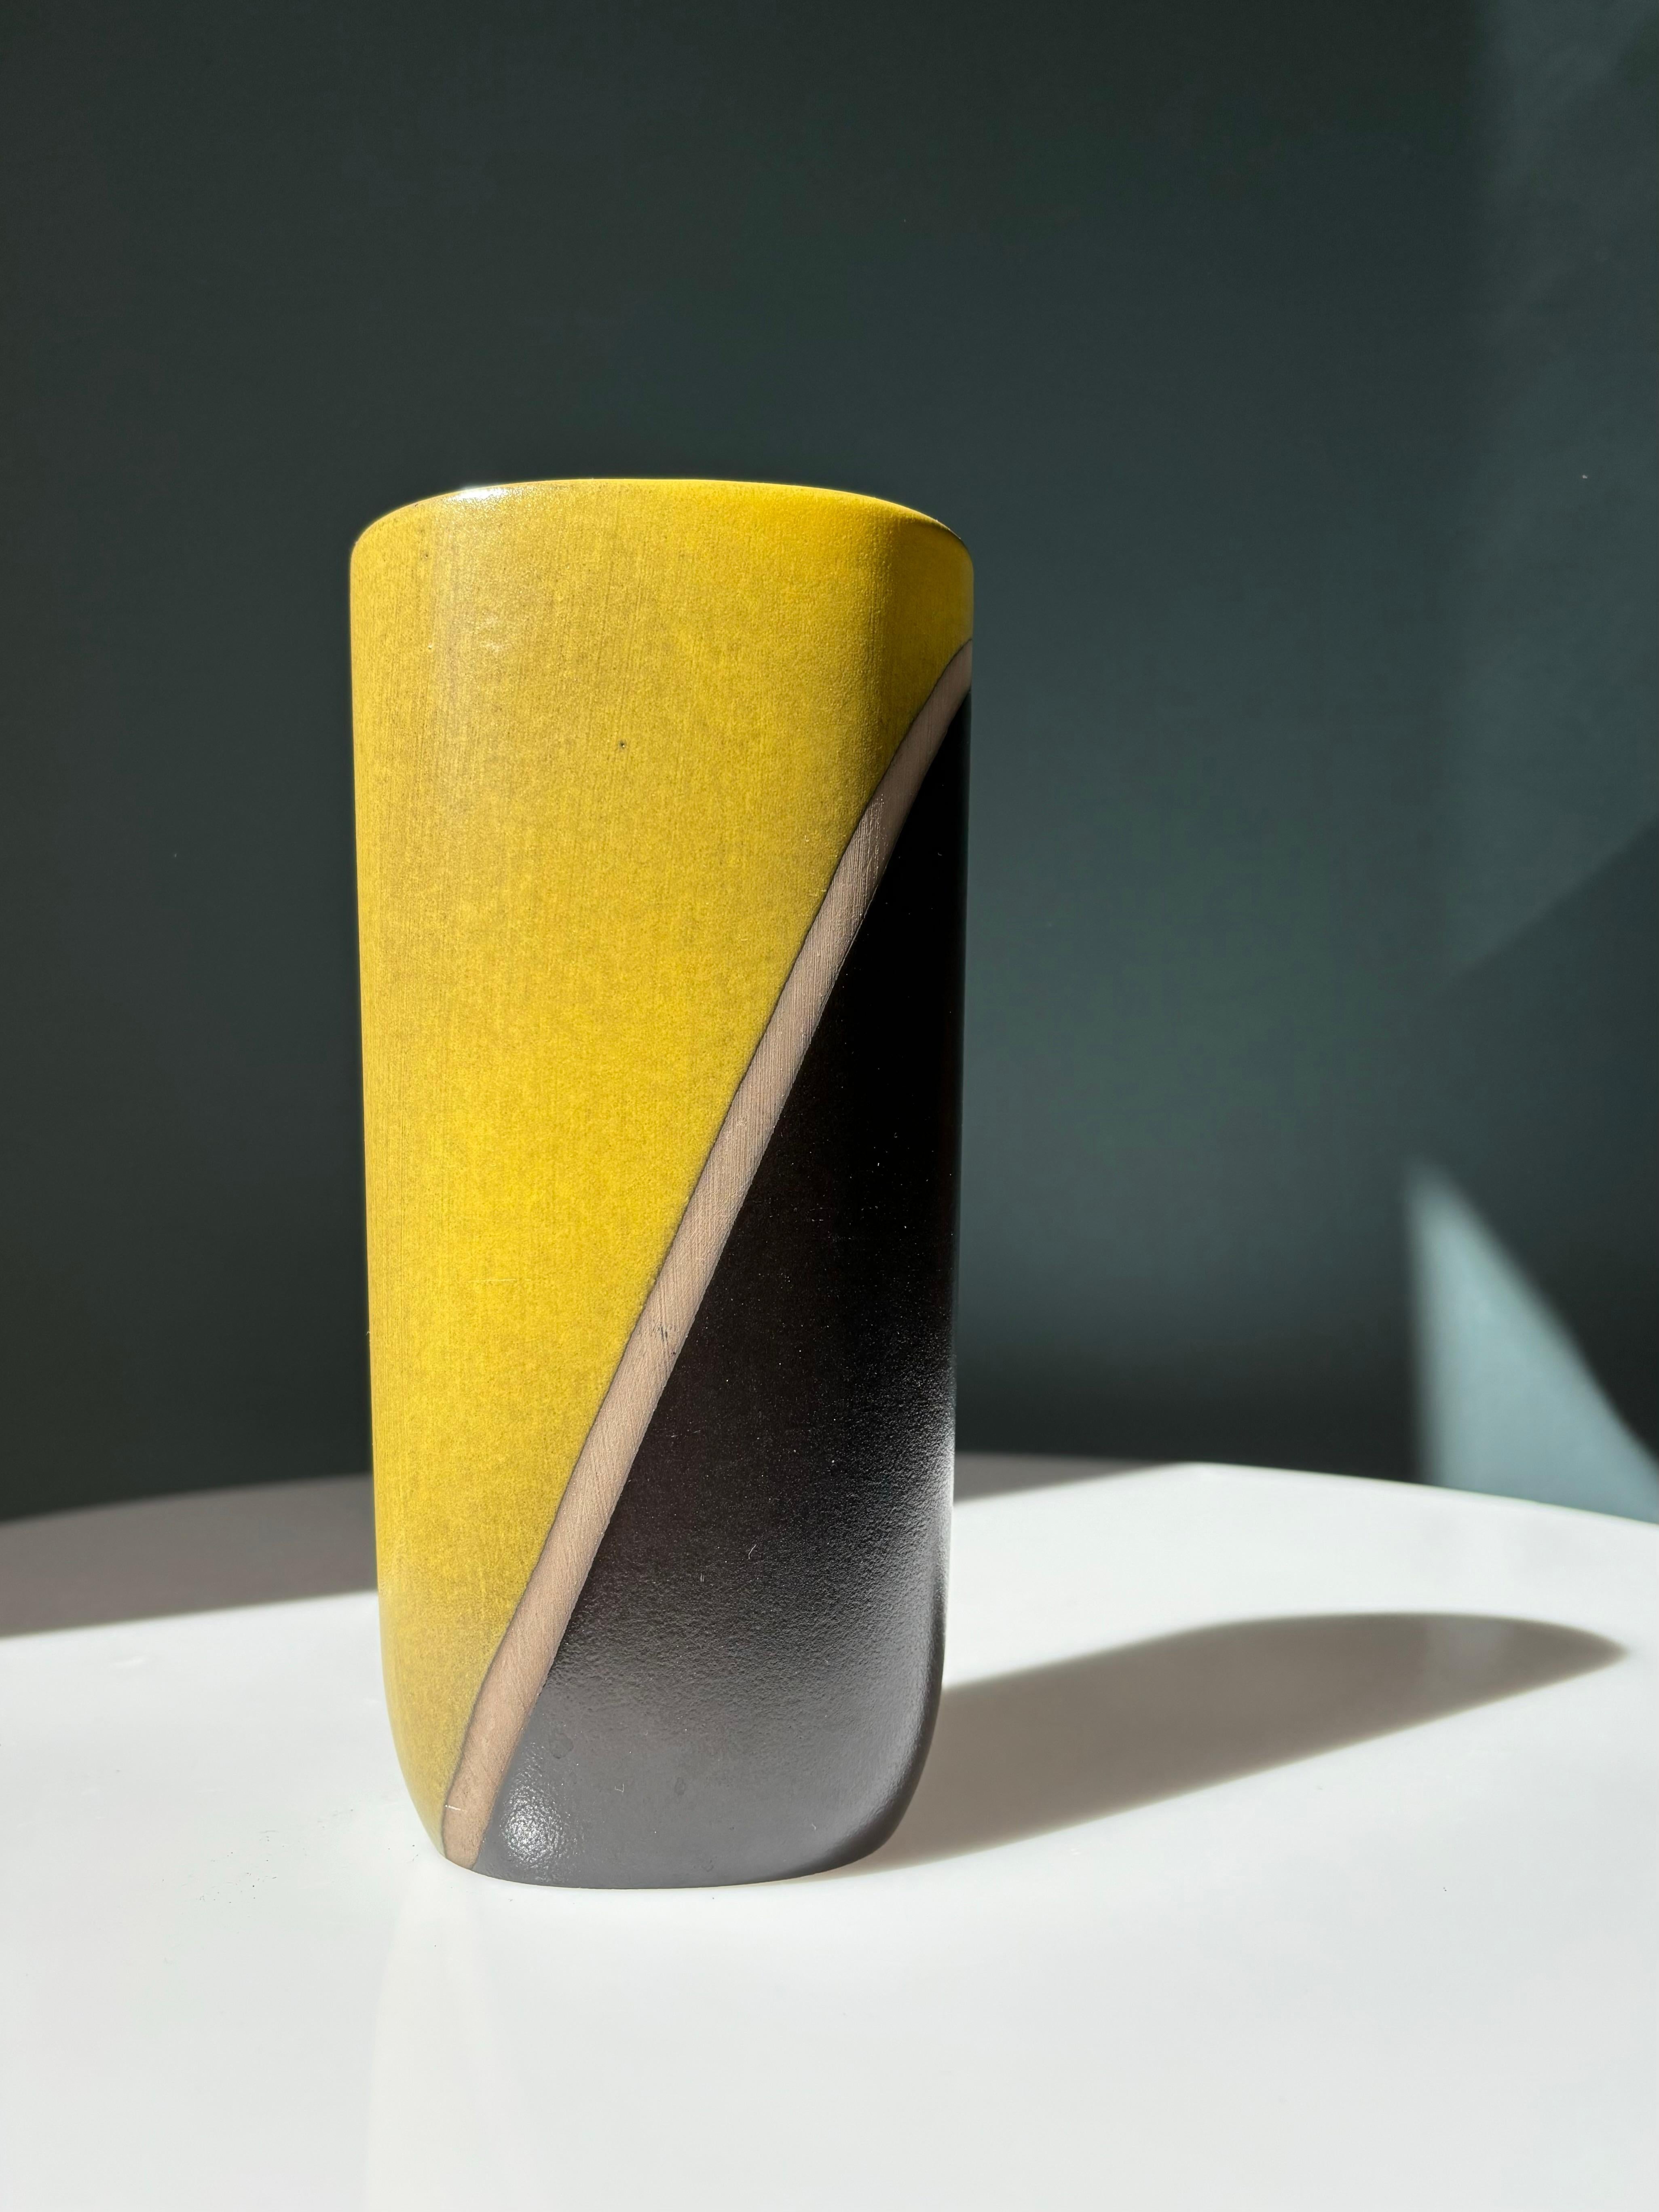 Oval shaped Swedish Modern vase with strong geometric decor. Dusty tea green and anthracite black glaze separated by one diagonal unglazed line in the middle. Designed and handmade by Gothenburg-born Hjördis Oldfors (1920-2014) for Upsala Ekeby in